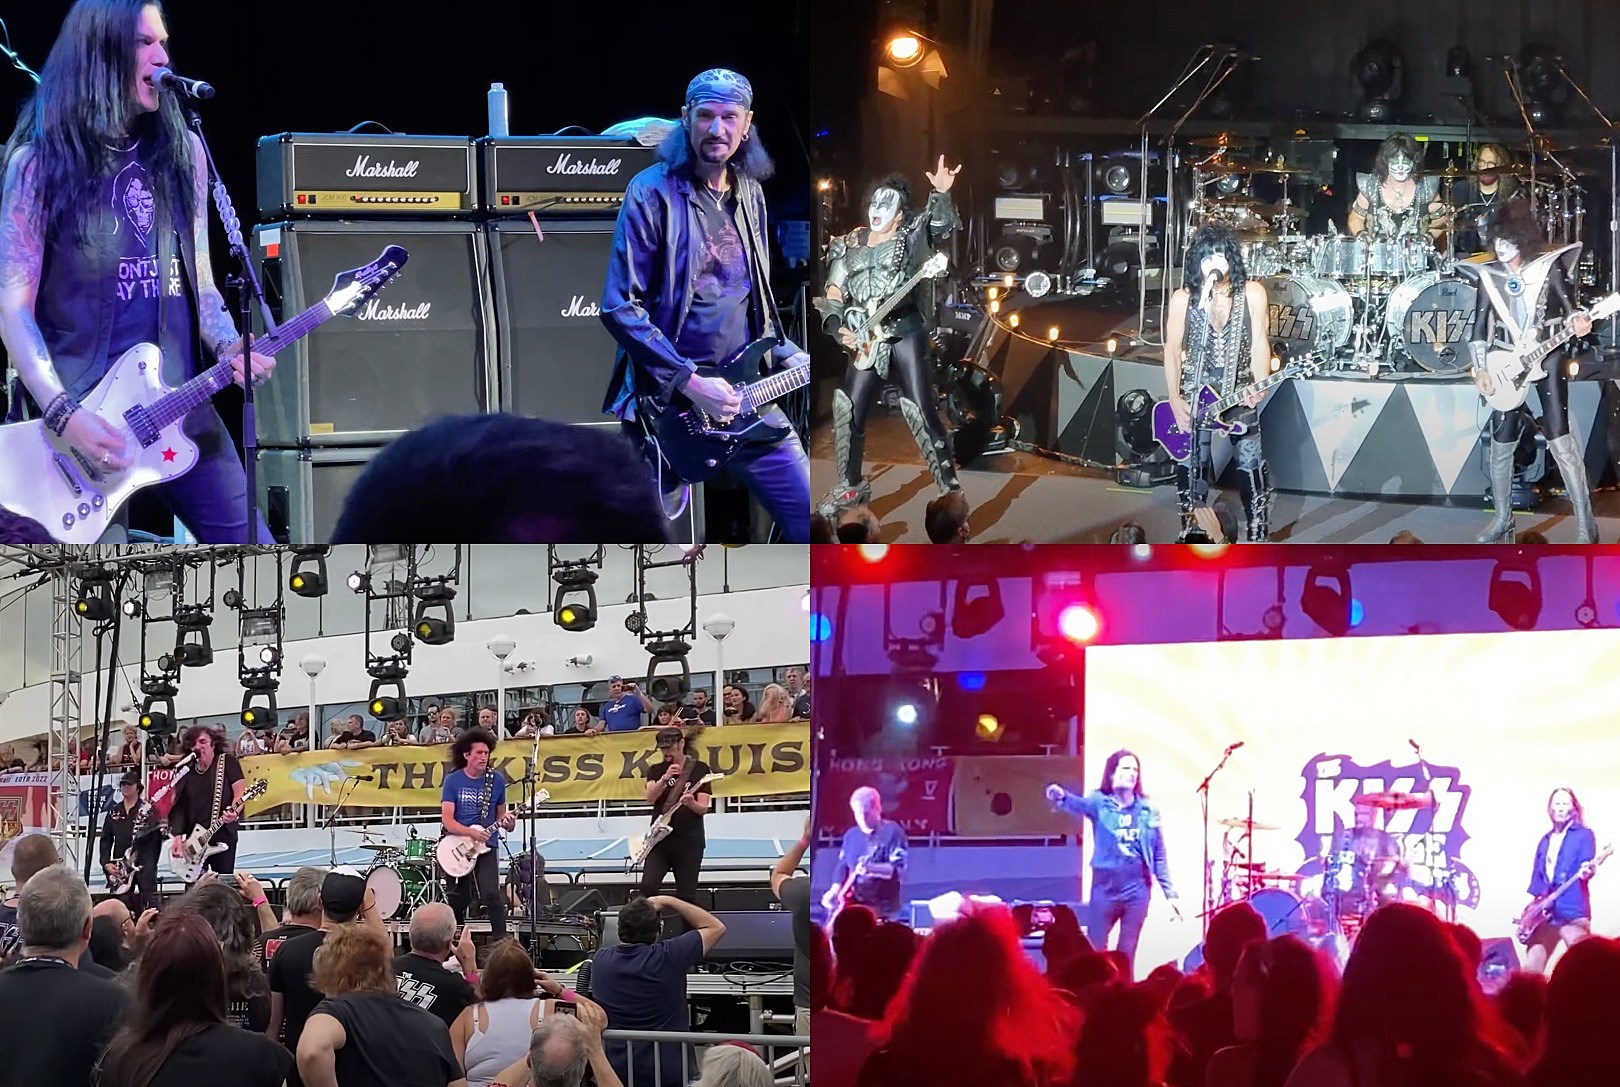 The 5 Best Moments From the 2021 Kiss Kruise